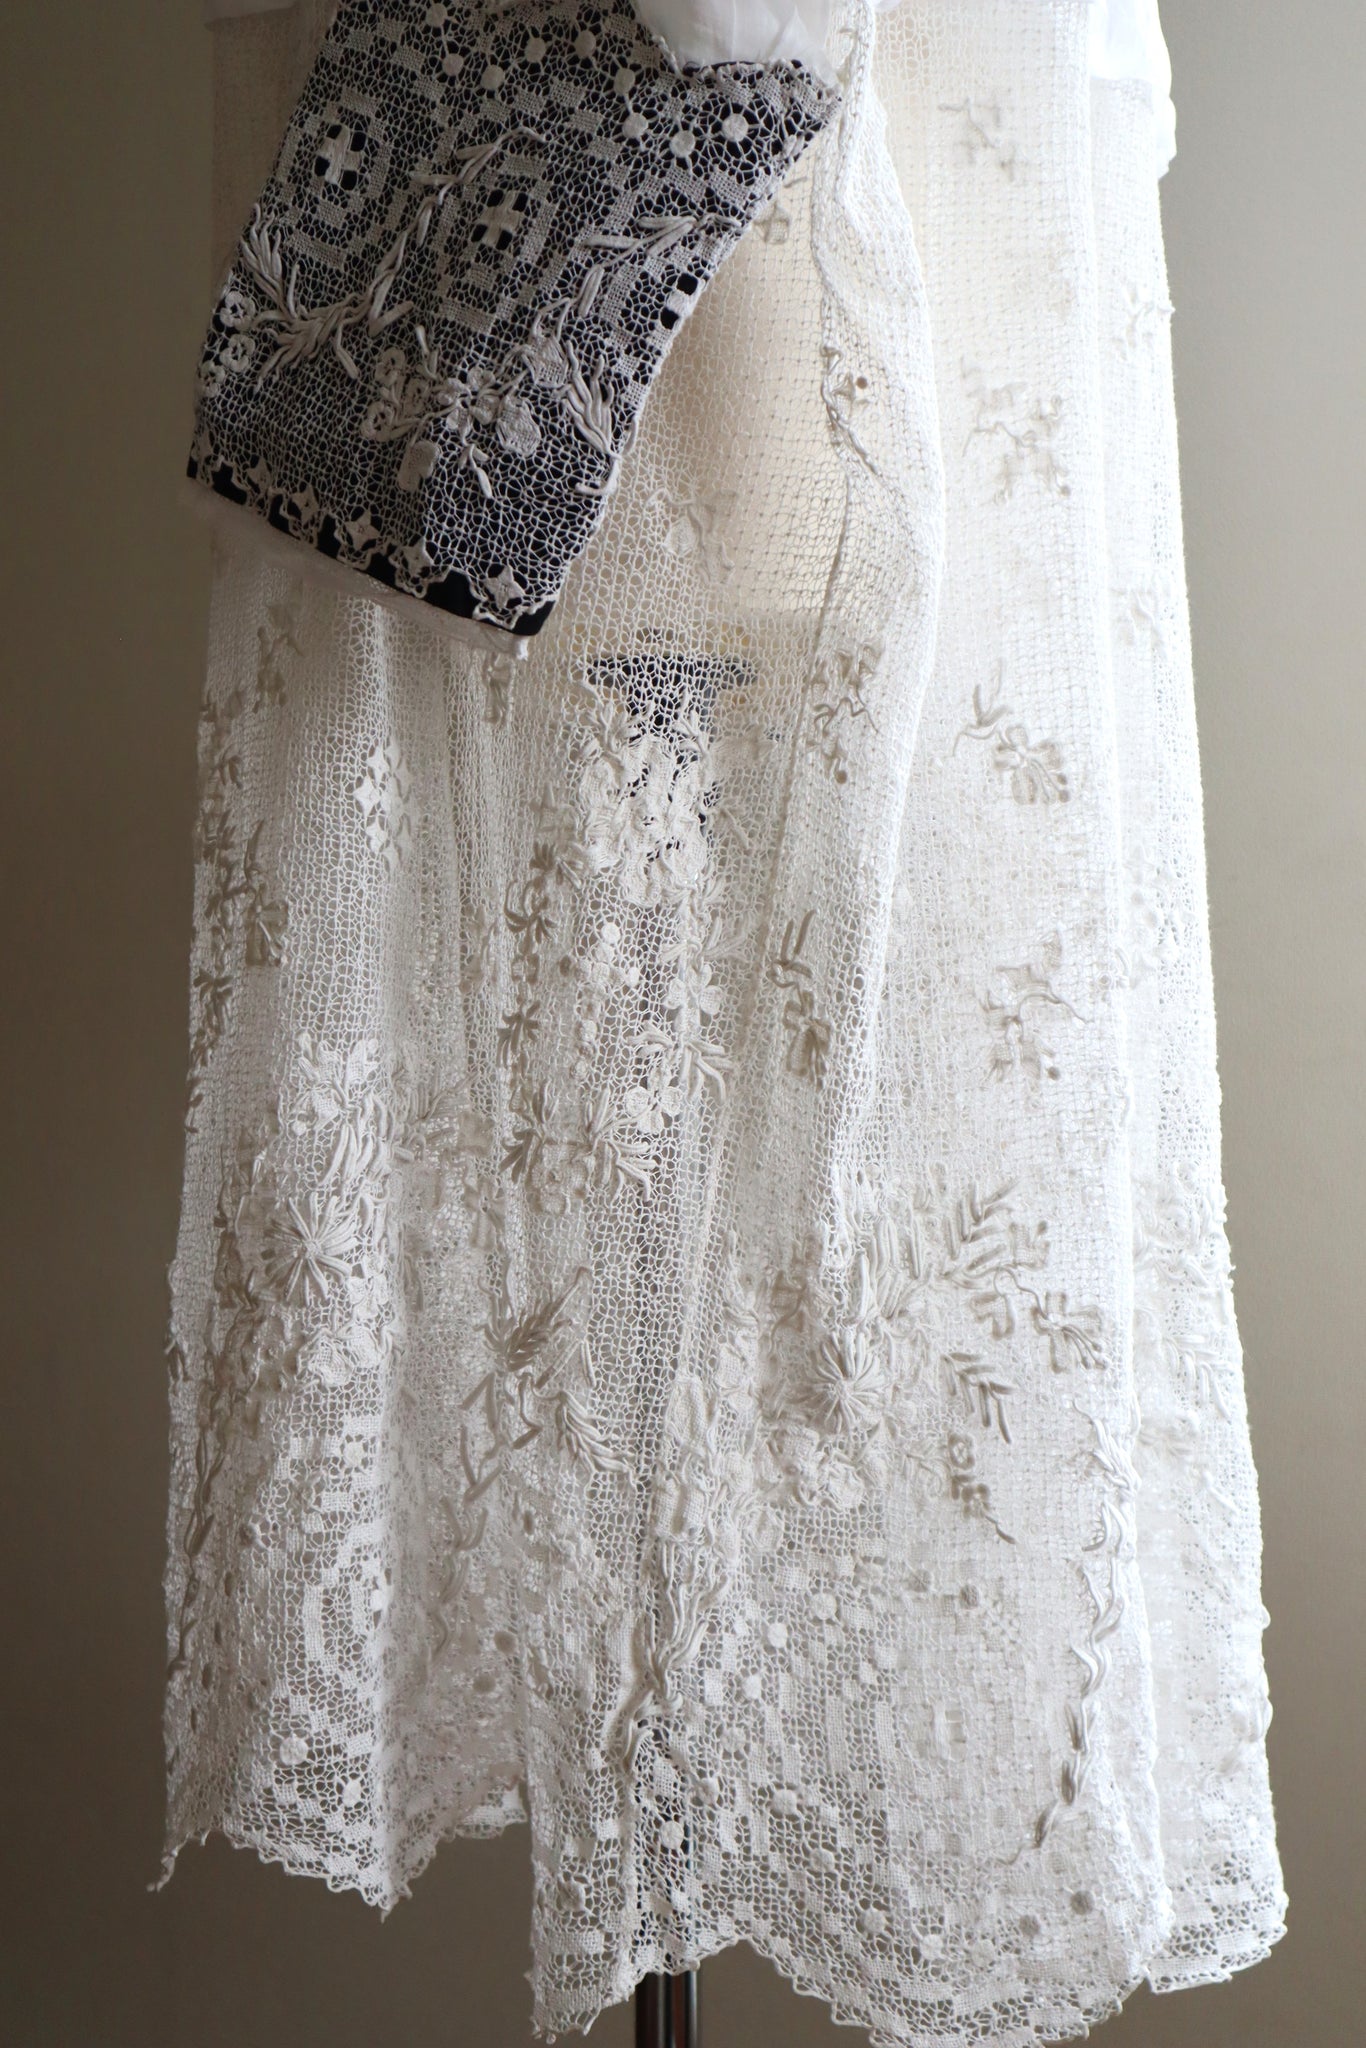 1900s Floral Embroidery Lace Black Cuffs Church Dress